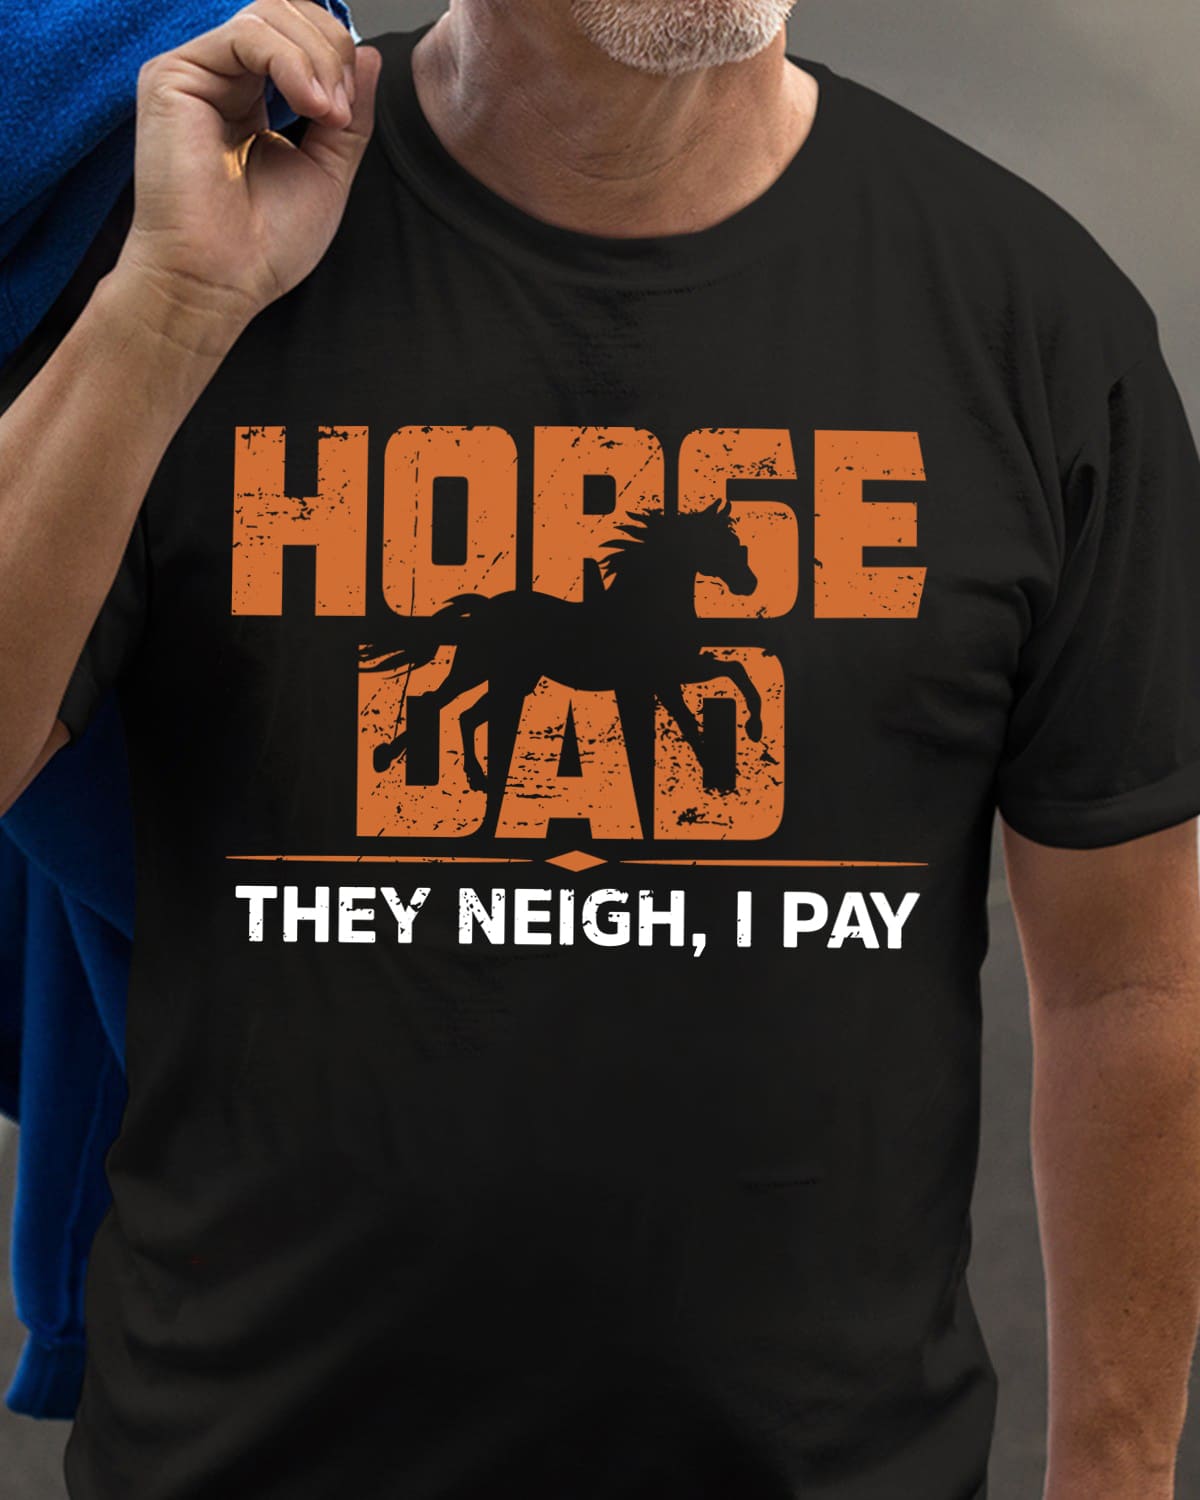 Horse dad - They neigh I pay, running horse graphic T-shirt